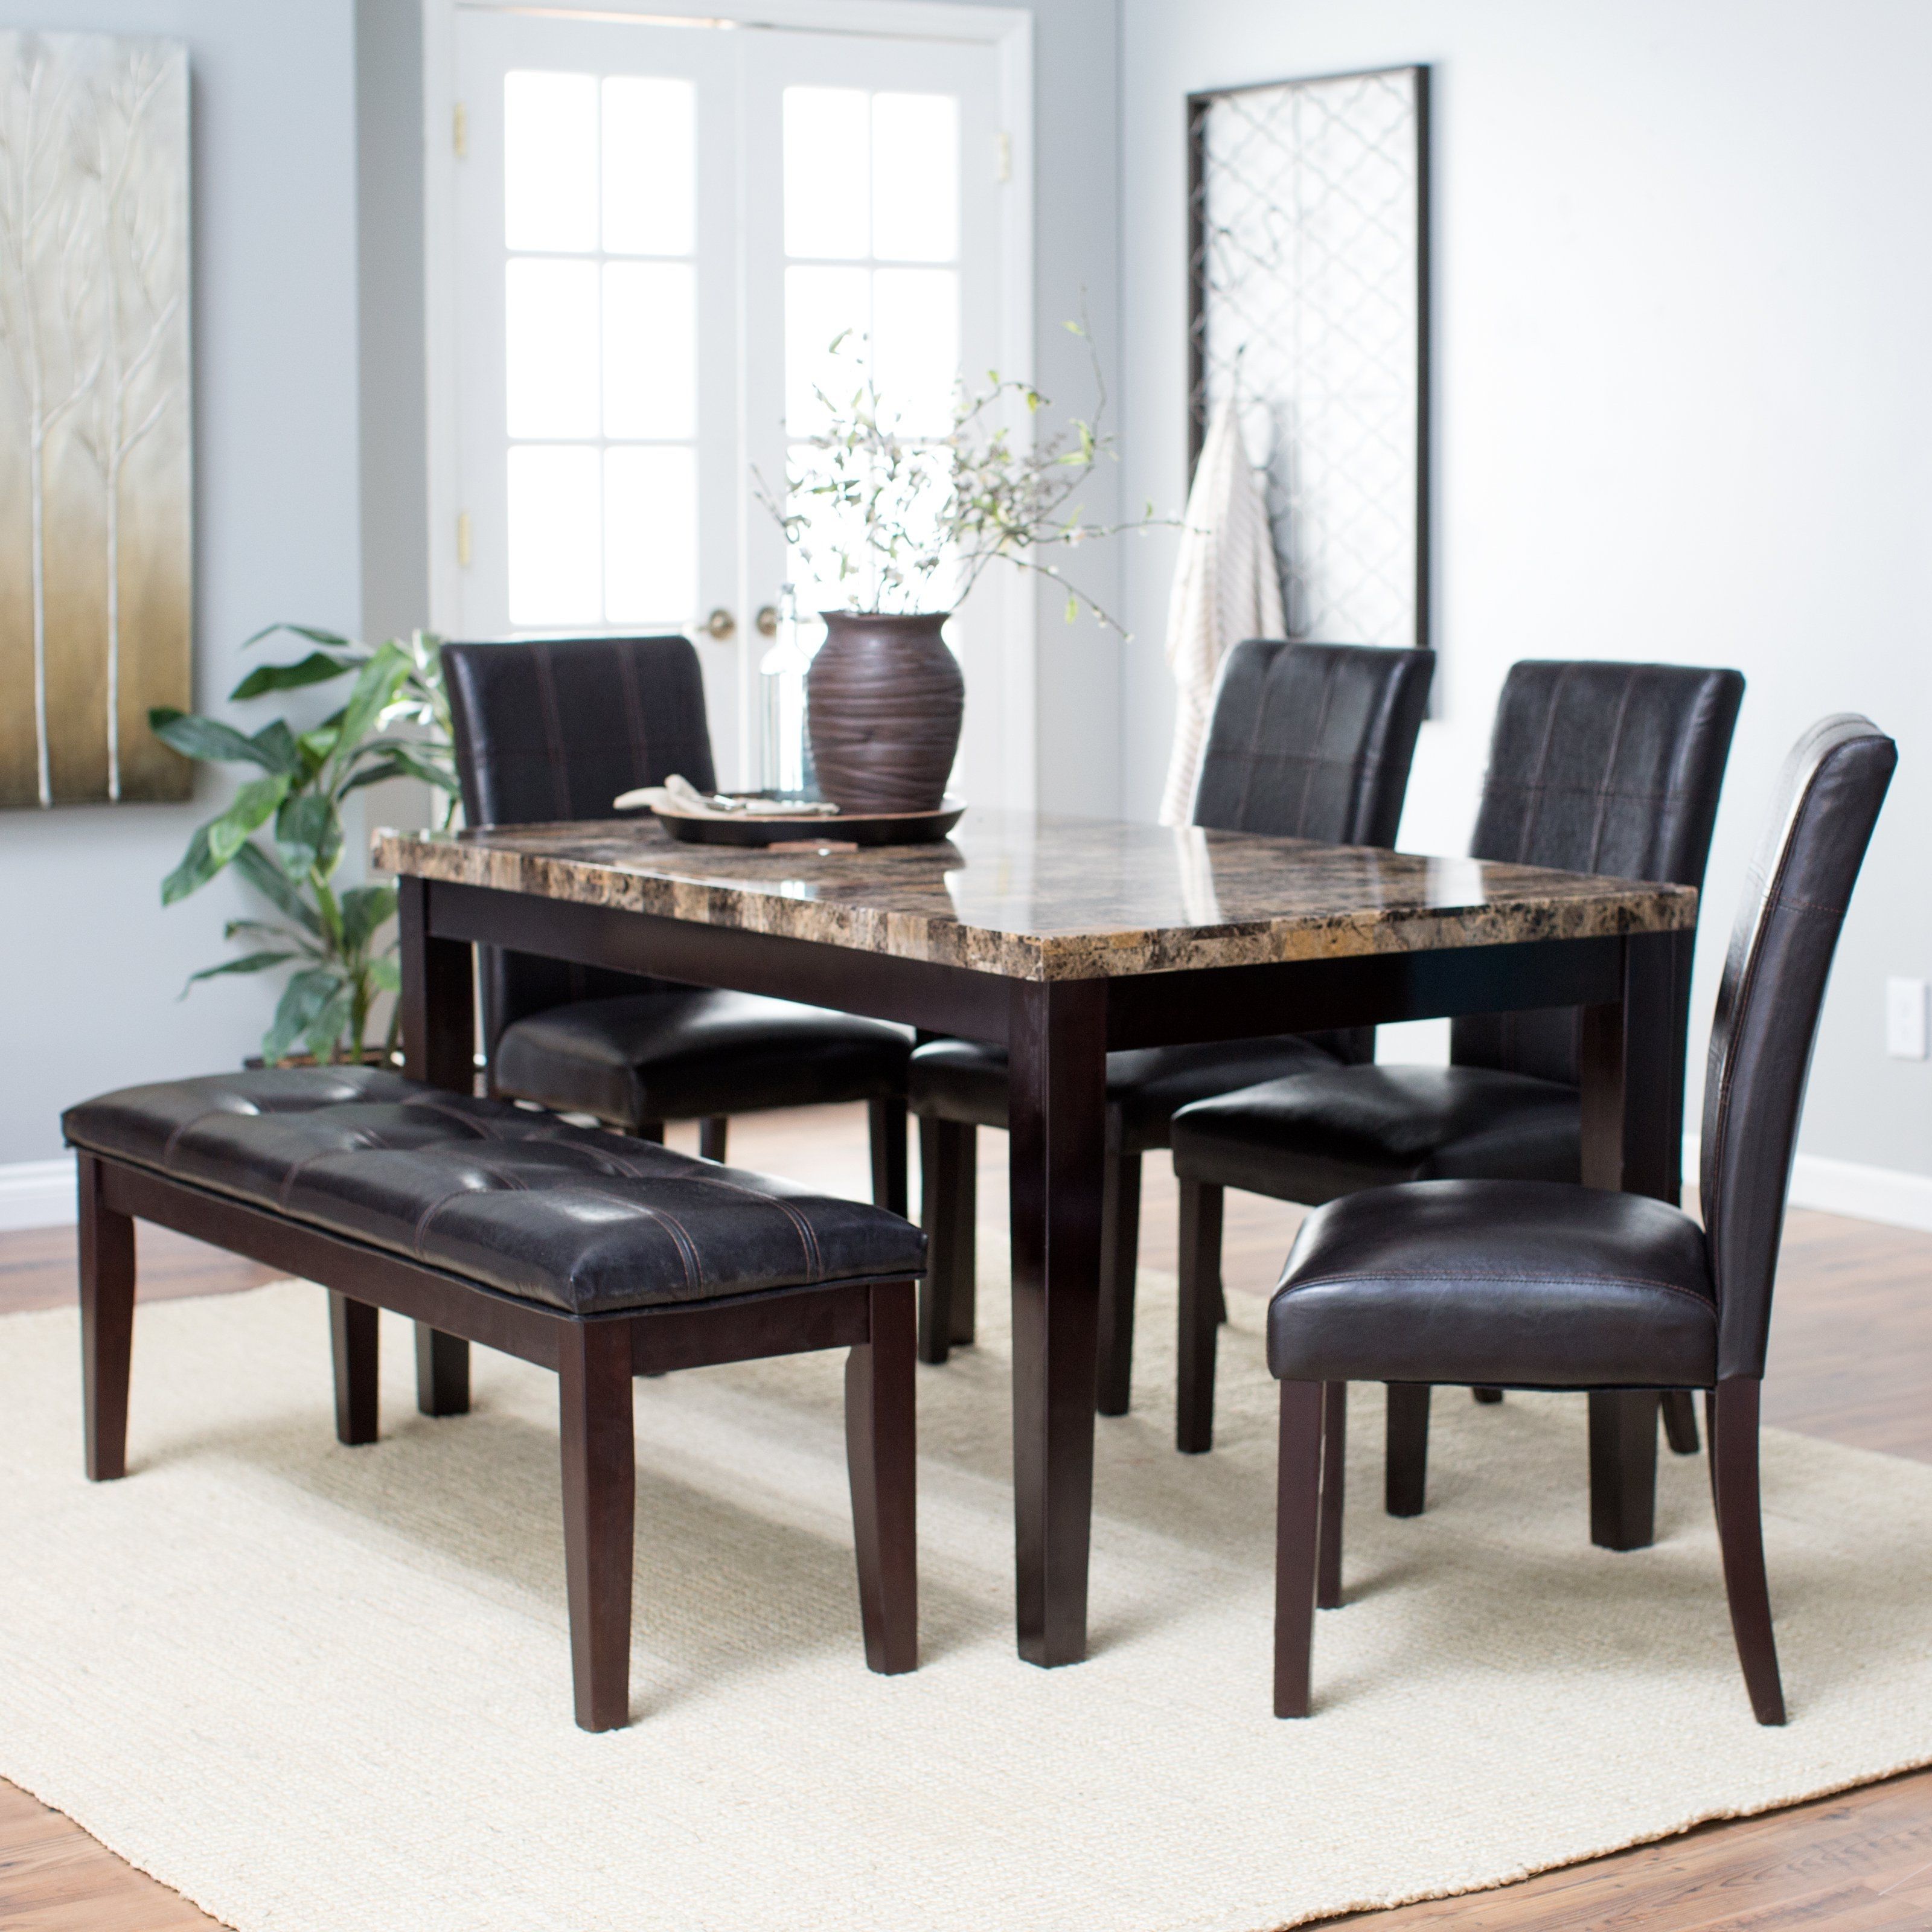 Finley Home Palazzo 6 Piece Dining Set With Bench | From Hayneedle Within Most Recent Palazzo 3 Piece Dining Table Sets (View 1 of 20)